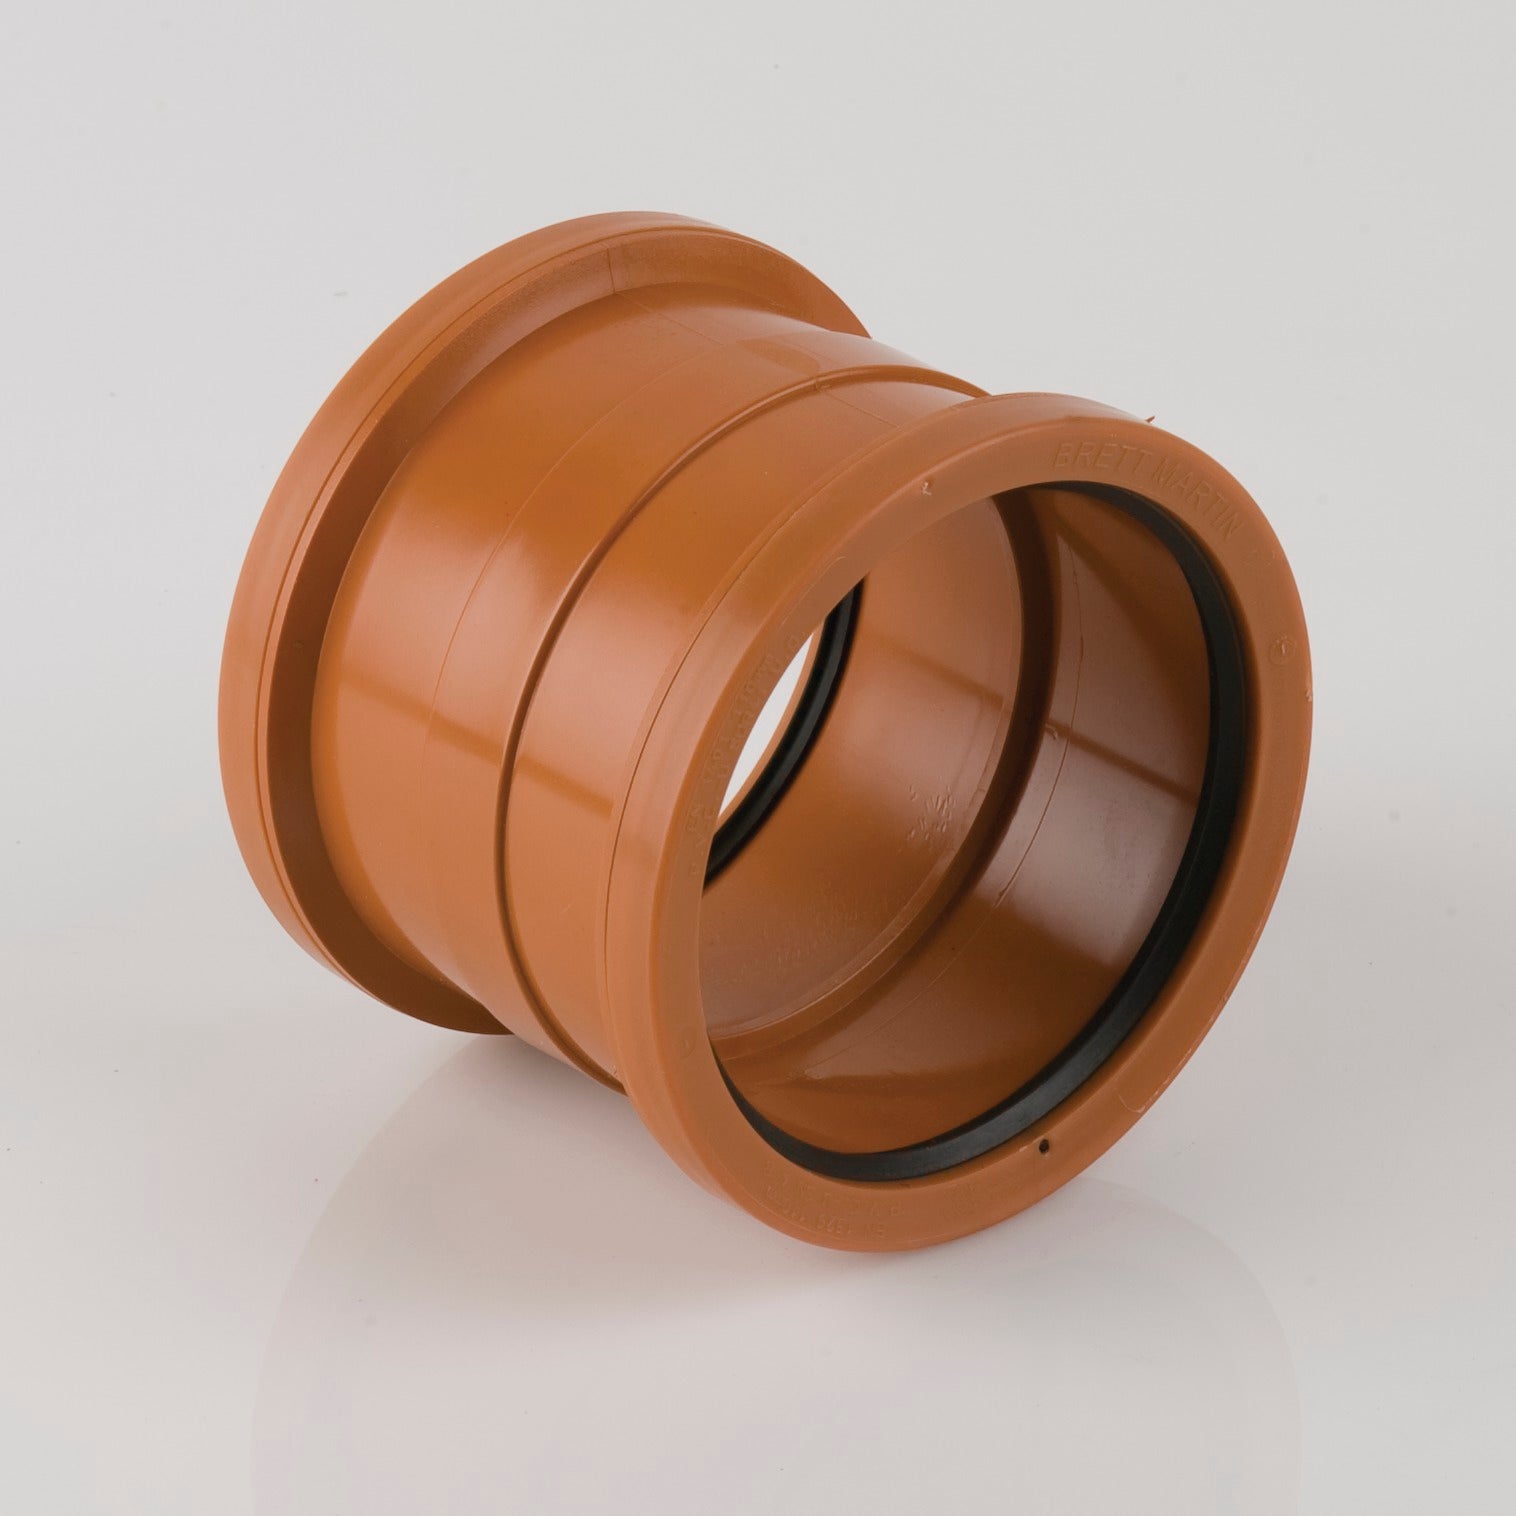 110mm Double Socket Drainage Pipe Connector (Terracotta Orange)